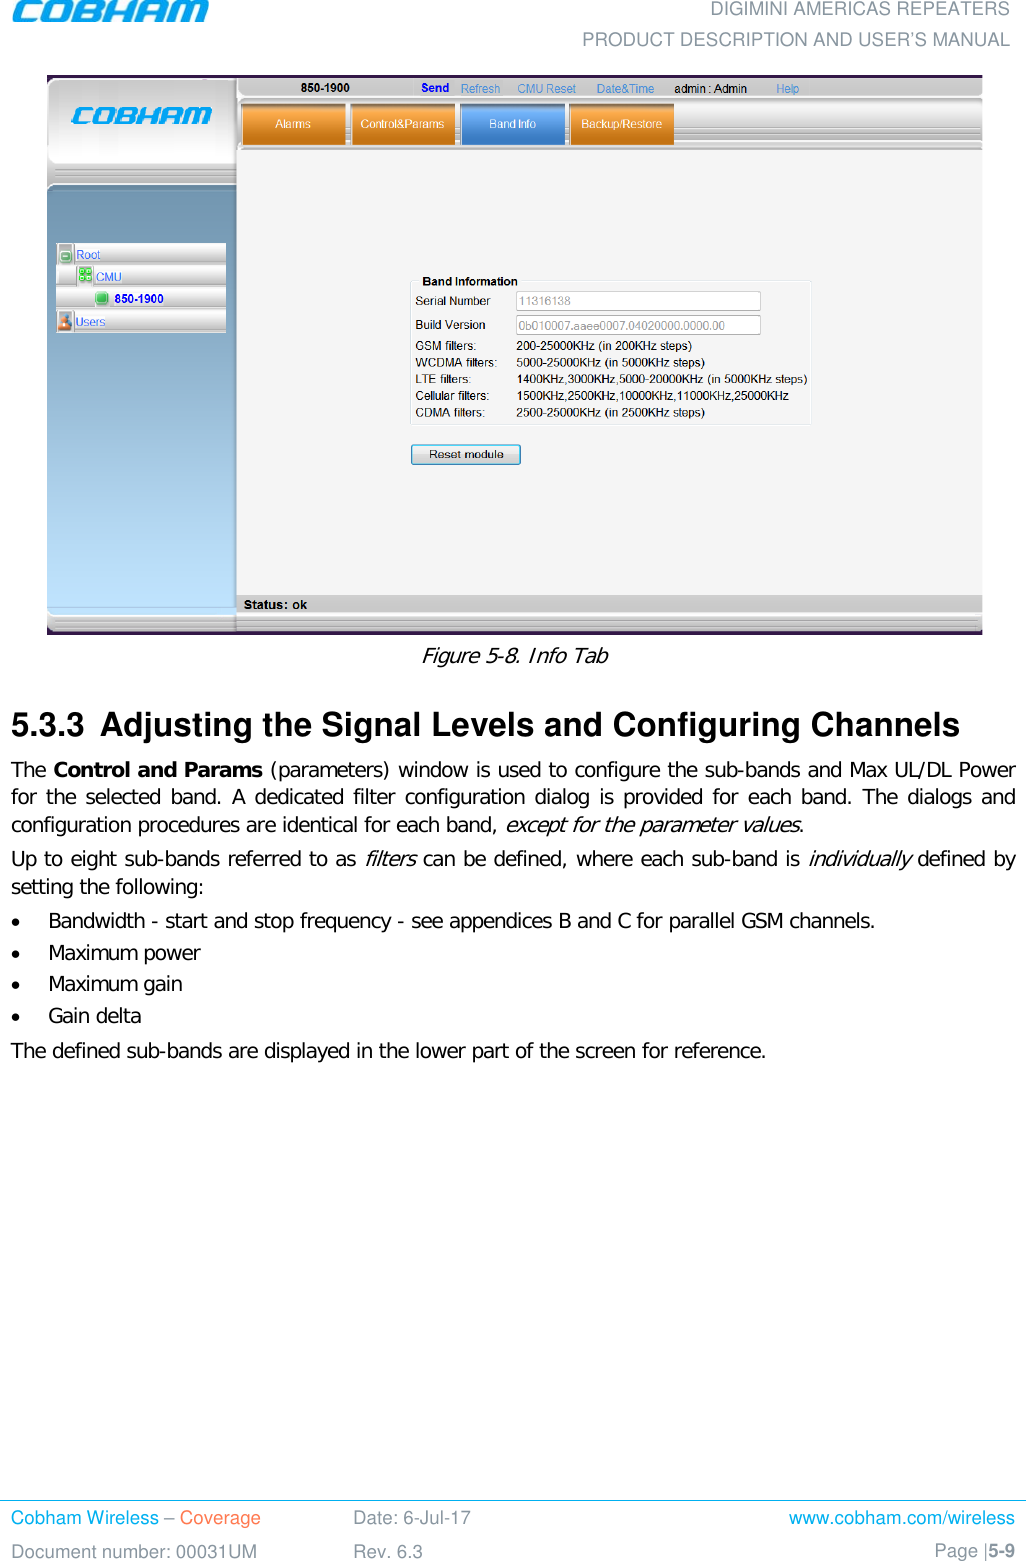  DIGIMINI AMERICAS REPEATERS PRODUCT DESCRIPTION AND USER’S MANUAL Cobham Wireless – Coverage Date: 6-Jul-17 www.cobham.com/wireless Document number: 00031UM Rev. 6.3 Page |5-9   Figure  5-8. Info Tab 5.3.3  Adjusting the Signal Levels and Configuring Channels The Control and Params (parameters) window is used to configure the sub-bands and Max UL/DL Power for the selected band. A dedicated filter configuration dialog is provided for each band. The dialogs and configuration procedures are identical for each band, except for the parameter values.  Up to eight sub-bands referred to as filters can be defined, where each sub-band is individually defined by setting the following: • Bandwidth - start and stop frequency - see appendices B and C for parallel GSM channels. • Maximum power • Maximum gain • Gain delta The defined sub-bands are displayed in the lower part of the screen for reference.    